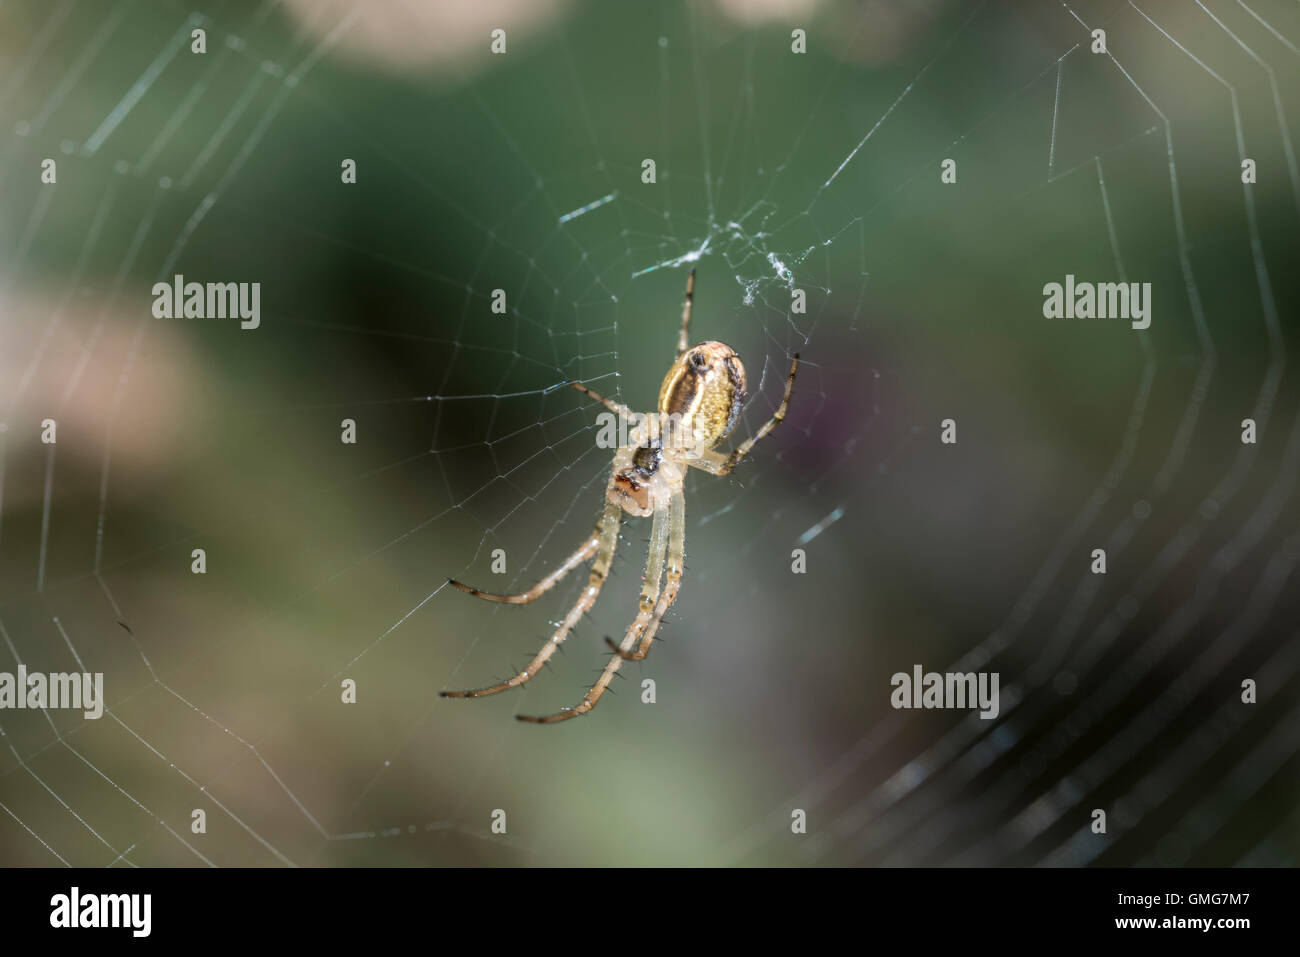 Underside of a spider on a web possibly a Theridon species (but not certain) Stock Photo